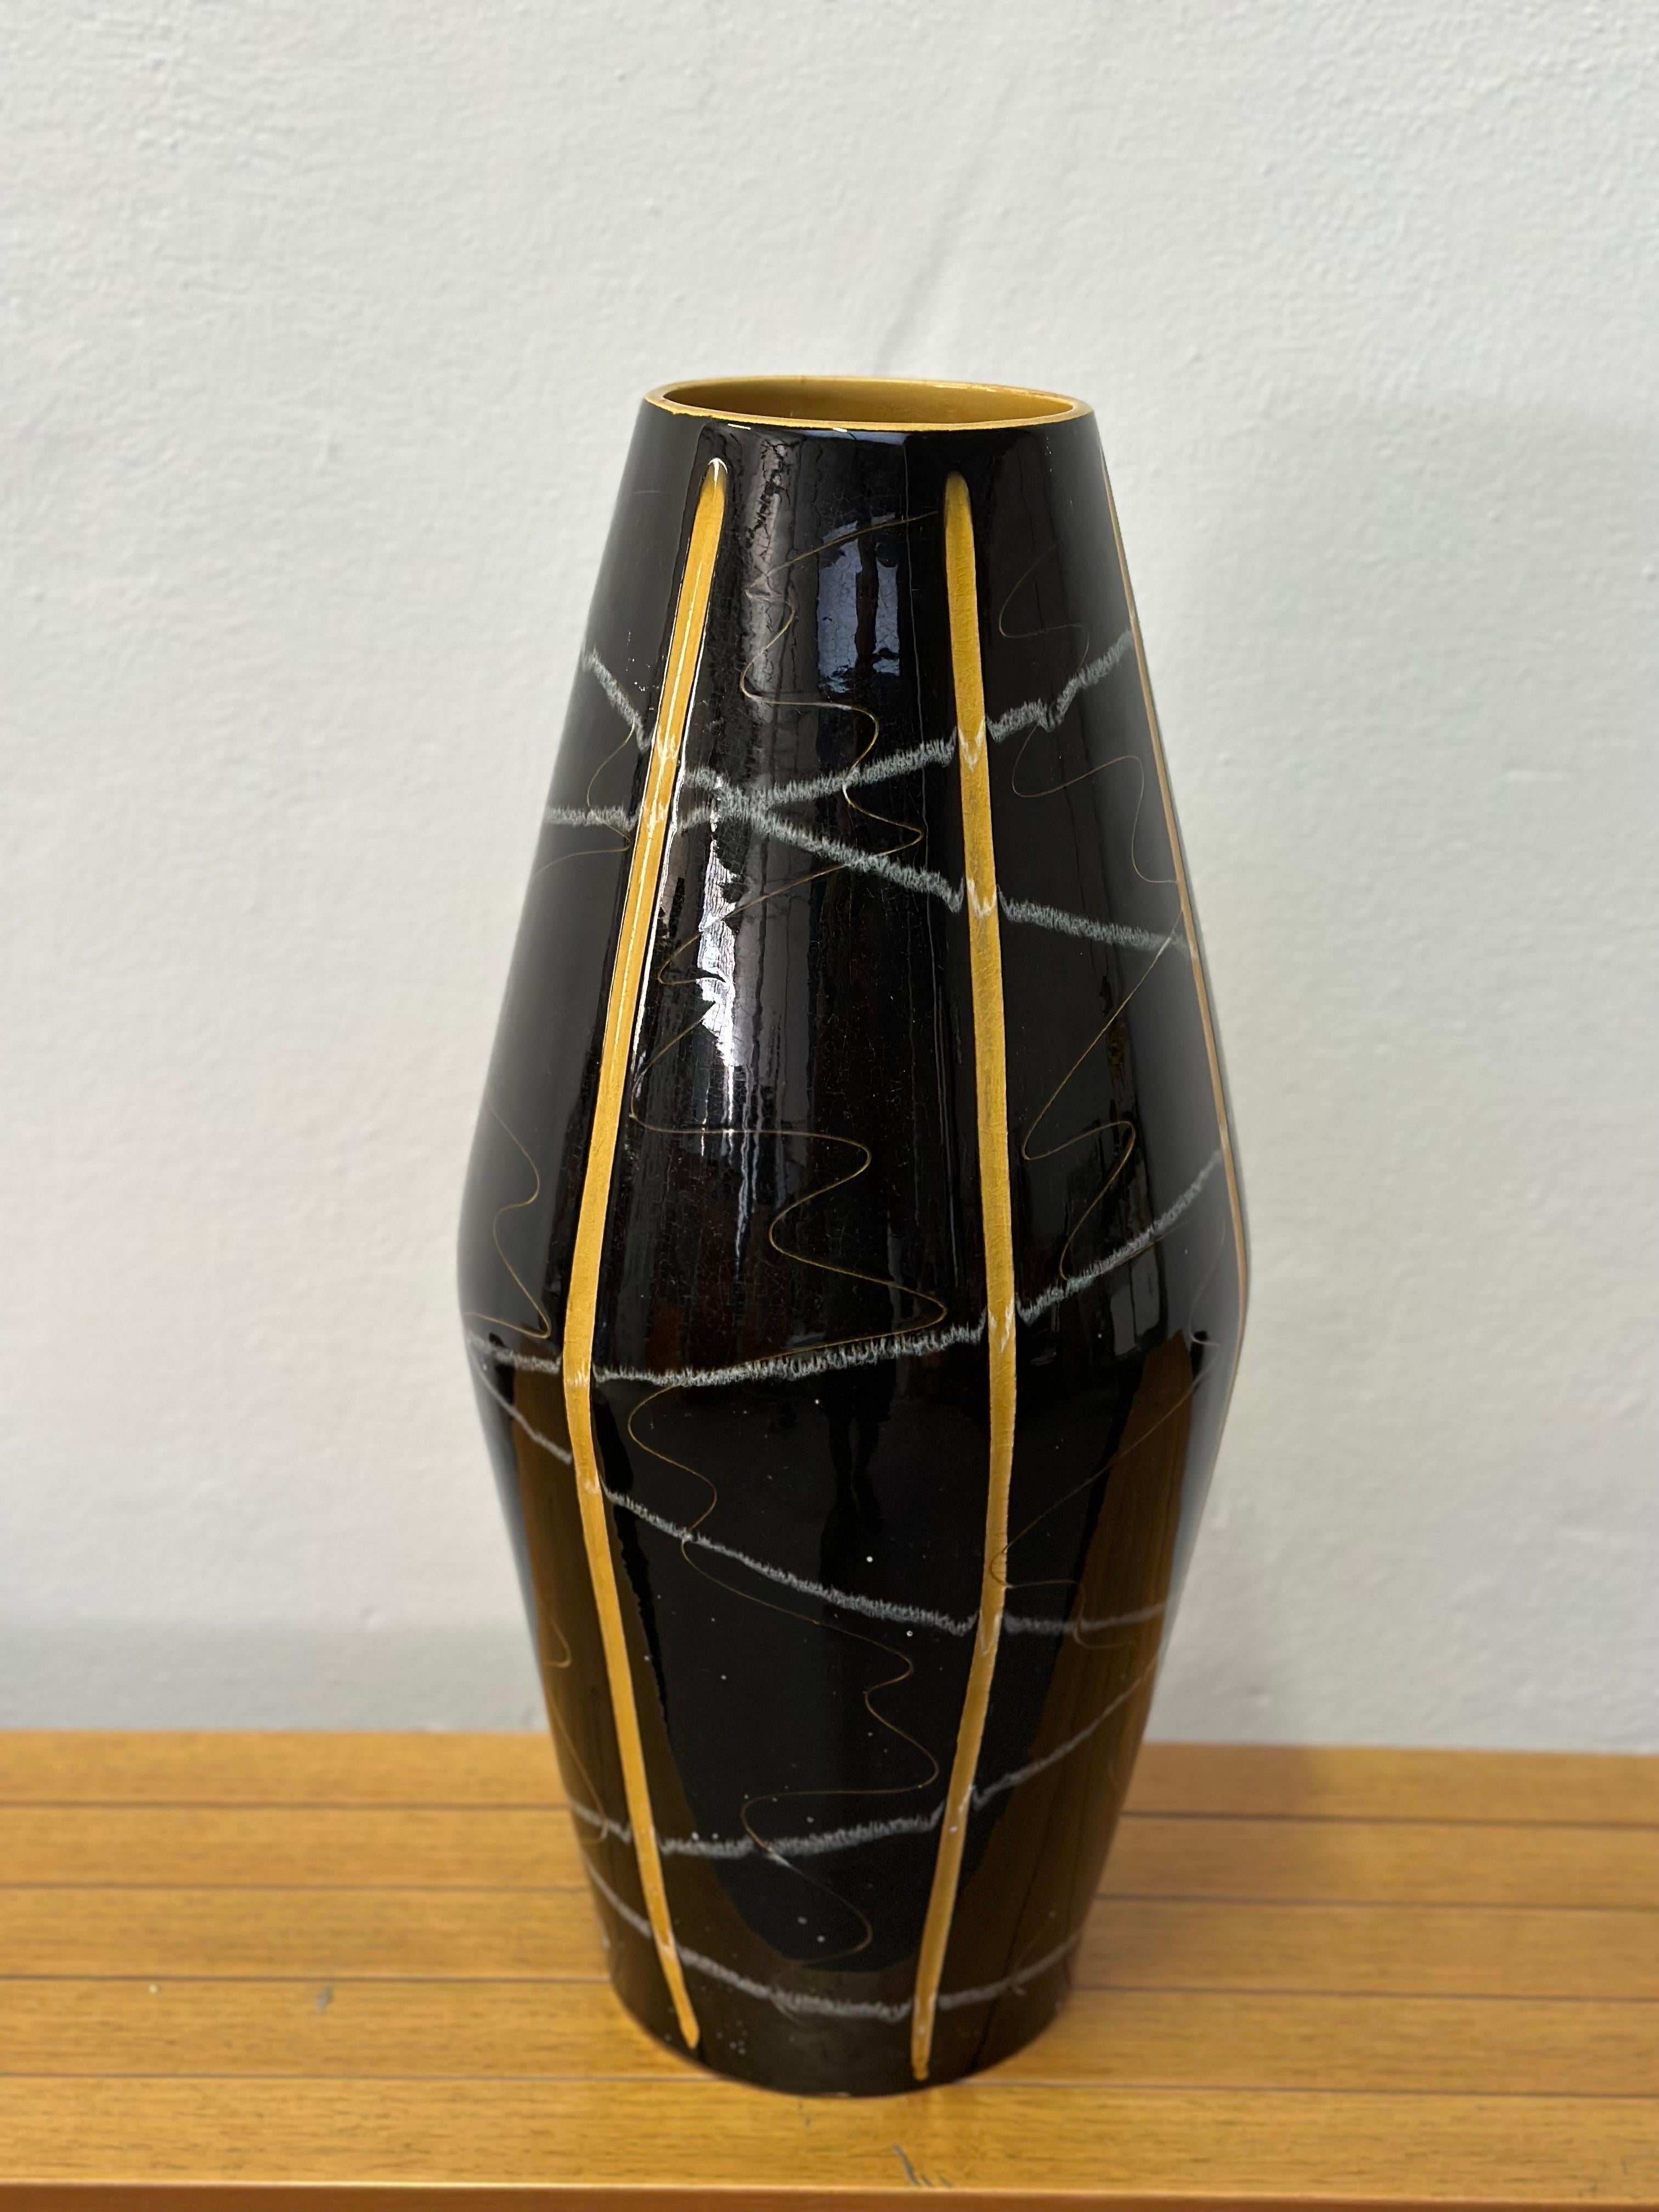 Introducing the Scheurich Keramik Foreign 248/50 Big Vase from the iconic 1970s era! This striking ceramic masterpiece embodies the essence of that vibrant decade, making it a standout addition to any collector's treasure trove.

Crafted with